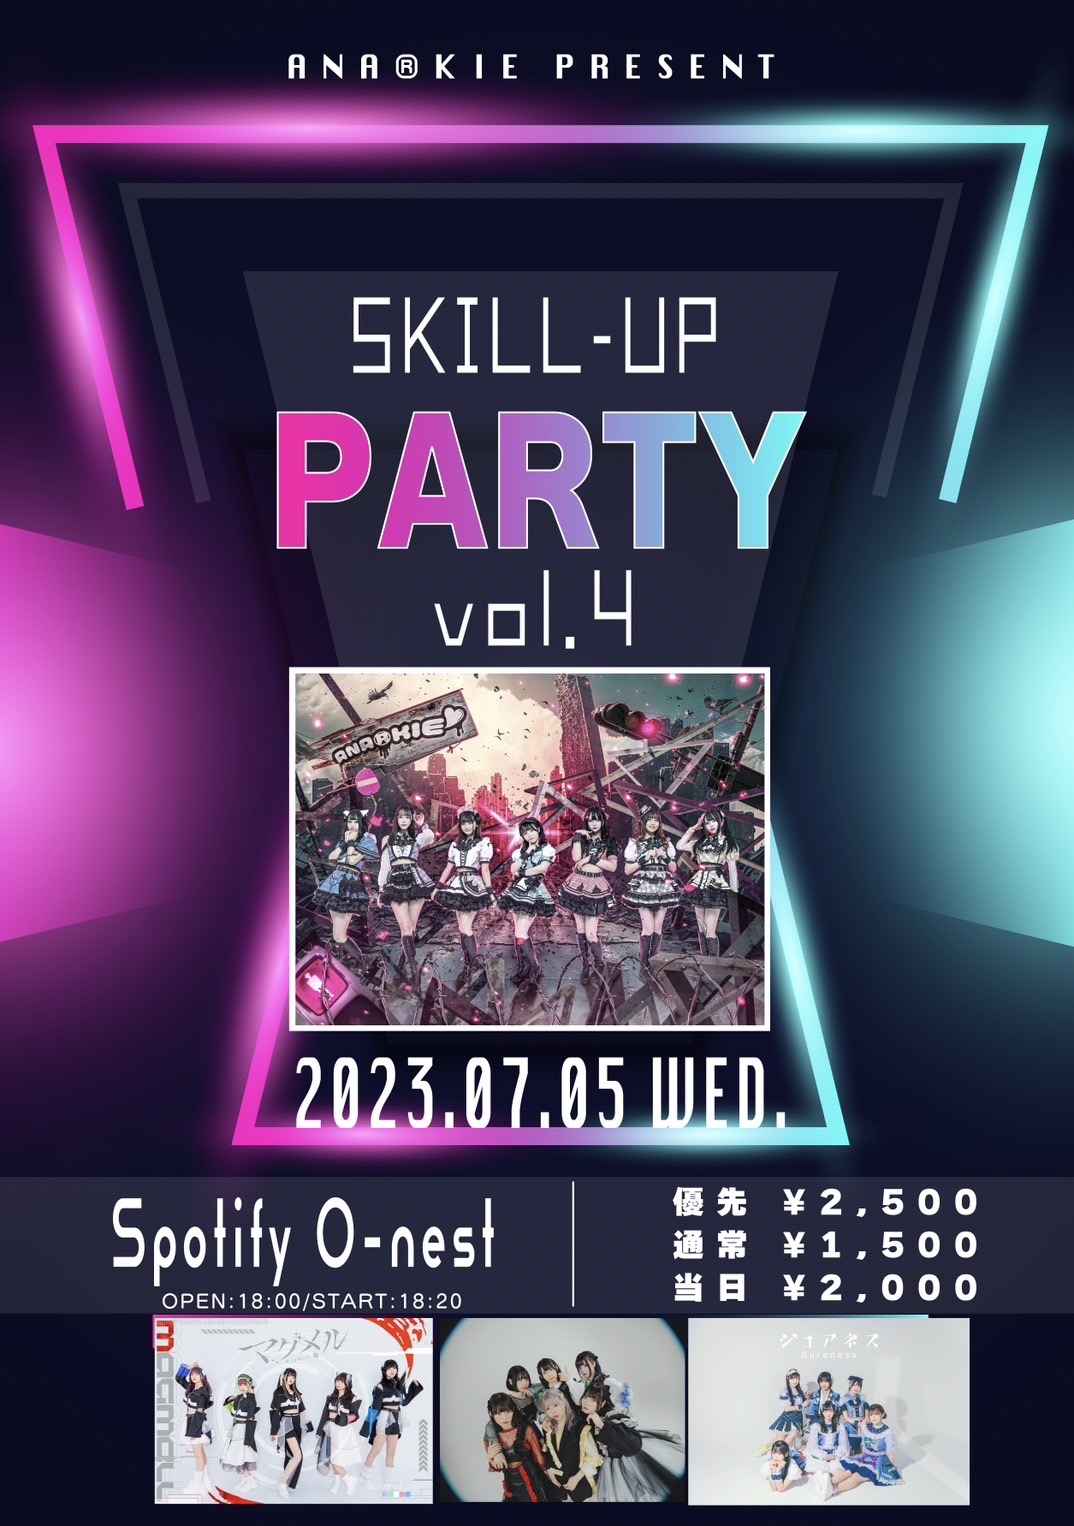 SKILL-UP PARTY vol.4